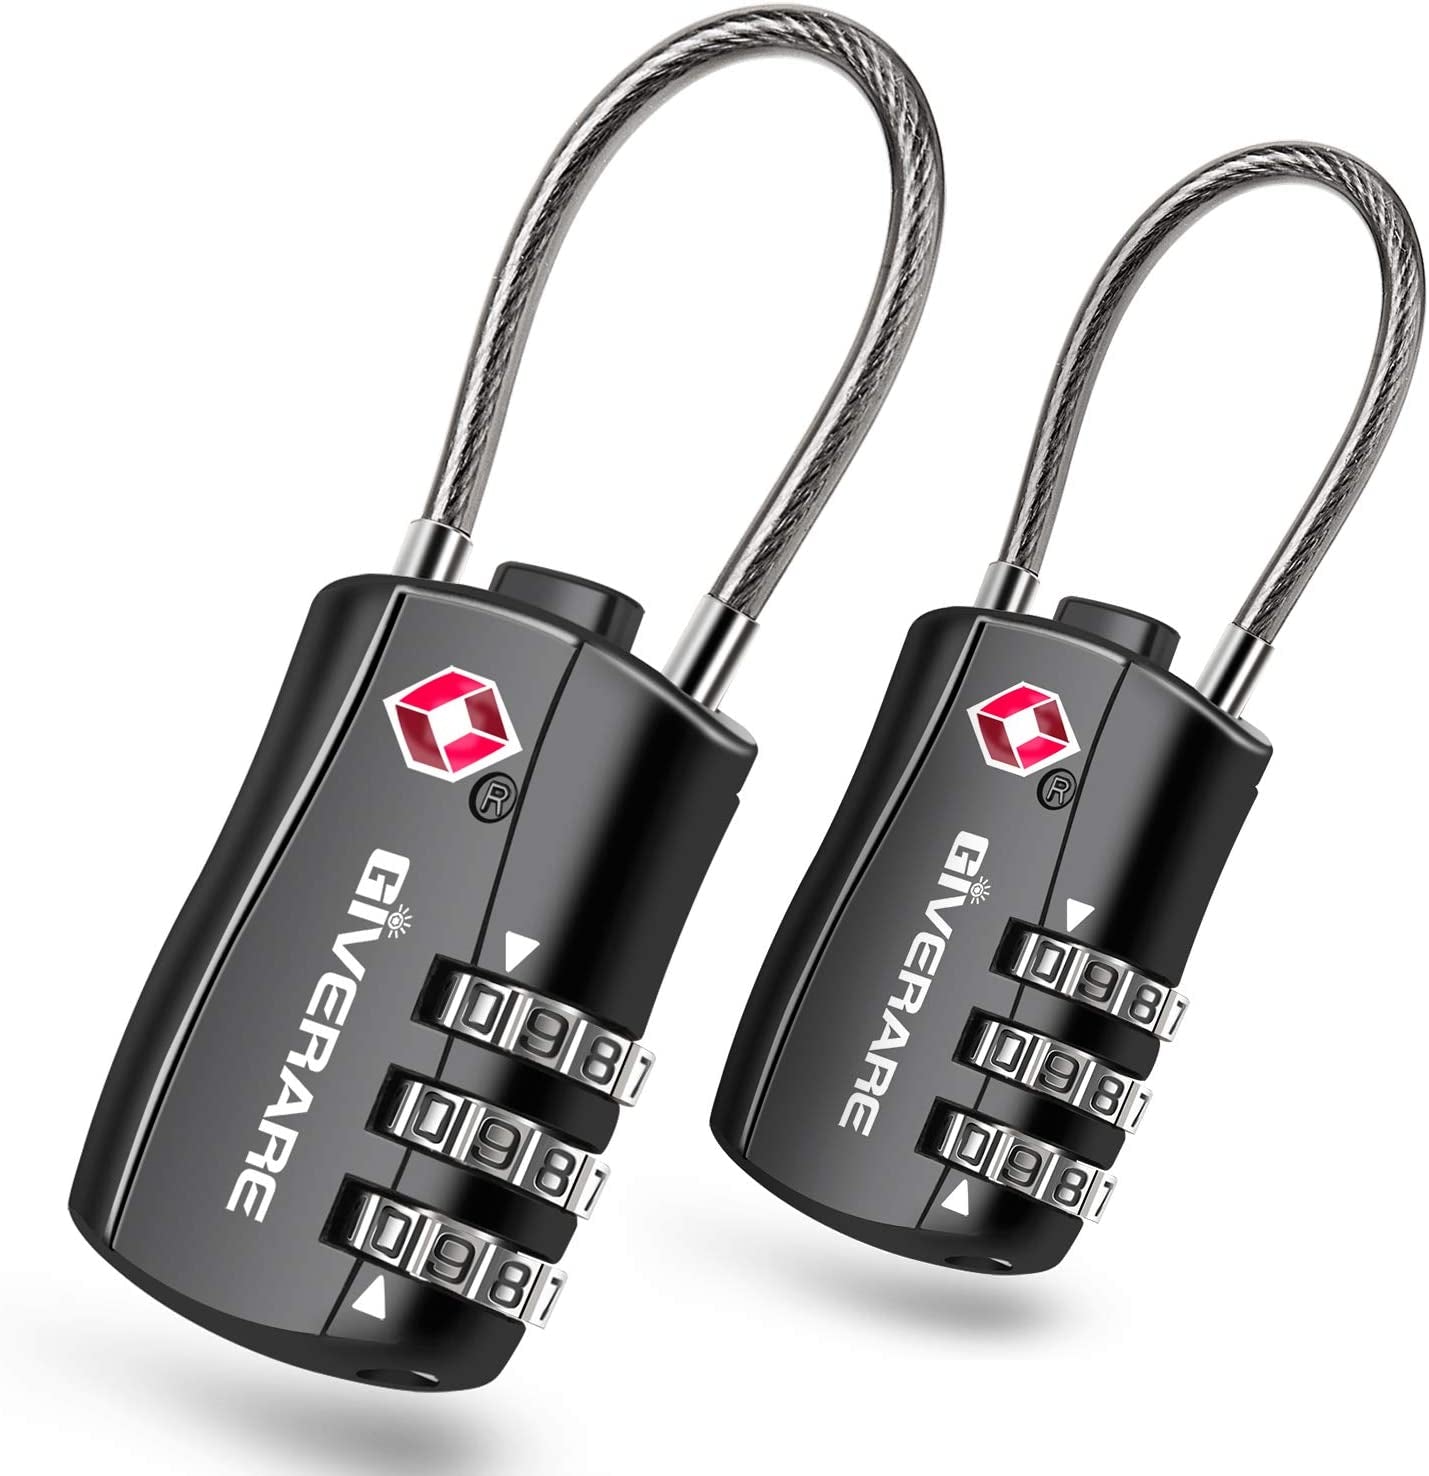 GIVERARE, GIVERARE 2 PCS TSA Approved Luggage Locks, Combination Travel Cable Lock, Re-Settable 3-Digit Padlocks with Alloy Body, Keyless Travel Sentry Accepted Padlock for Gym Locker, Golf Bag Case-Black